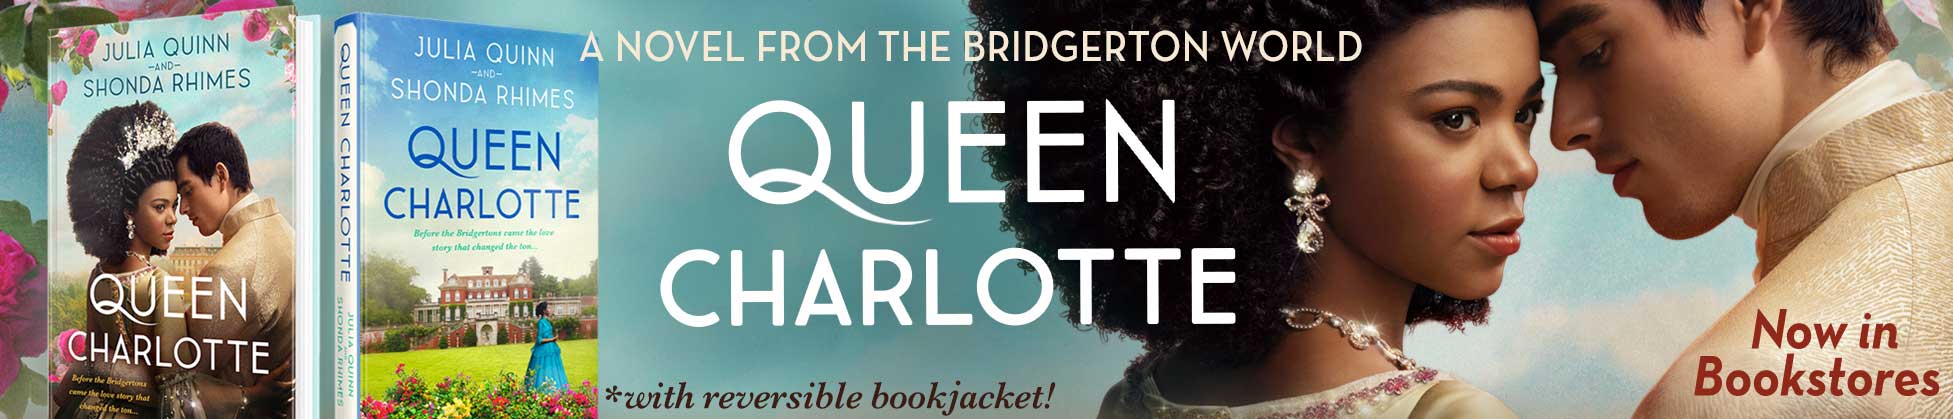 From #1 New York Times bestselling author Julia Quinn and television pioneer Shonda Rhimes comes a powerful and romantic novel of Bridgerton’s Queen Charlotte and King George III’s great love story and how it sparked a societal shift, inspired by the original series Queen Charlotte: A Bridgerton Story, created by Shondaland and streaming May 4 only on Netflix.